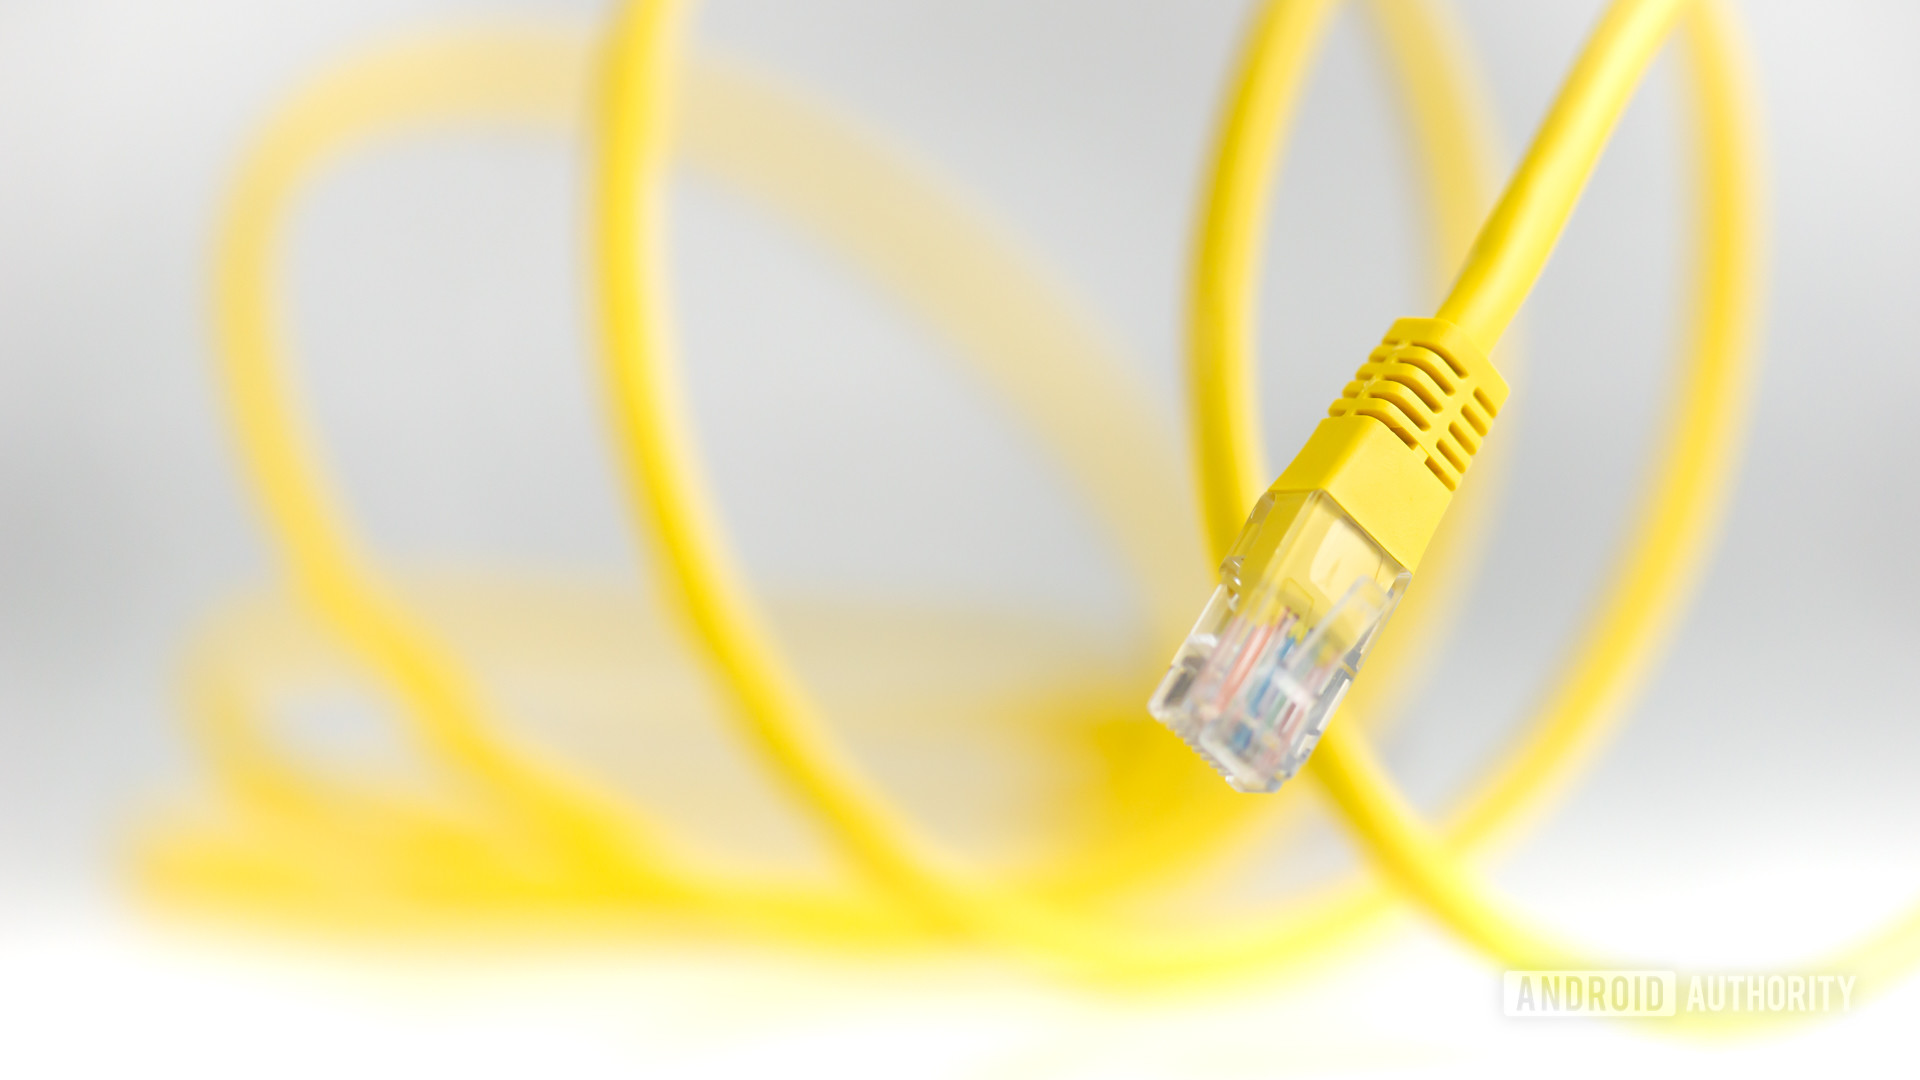 Ethernet cable stock photo 1